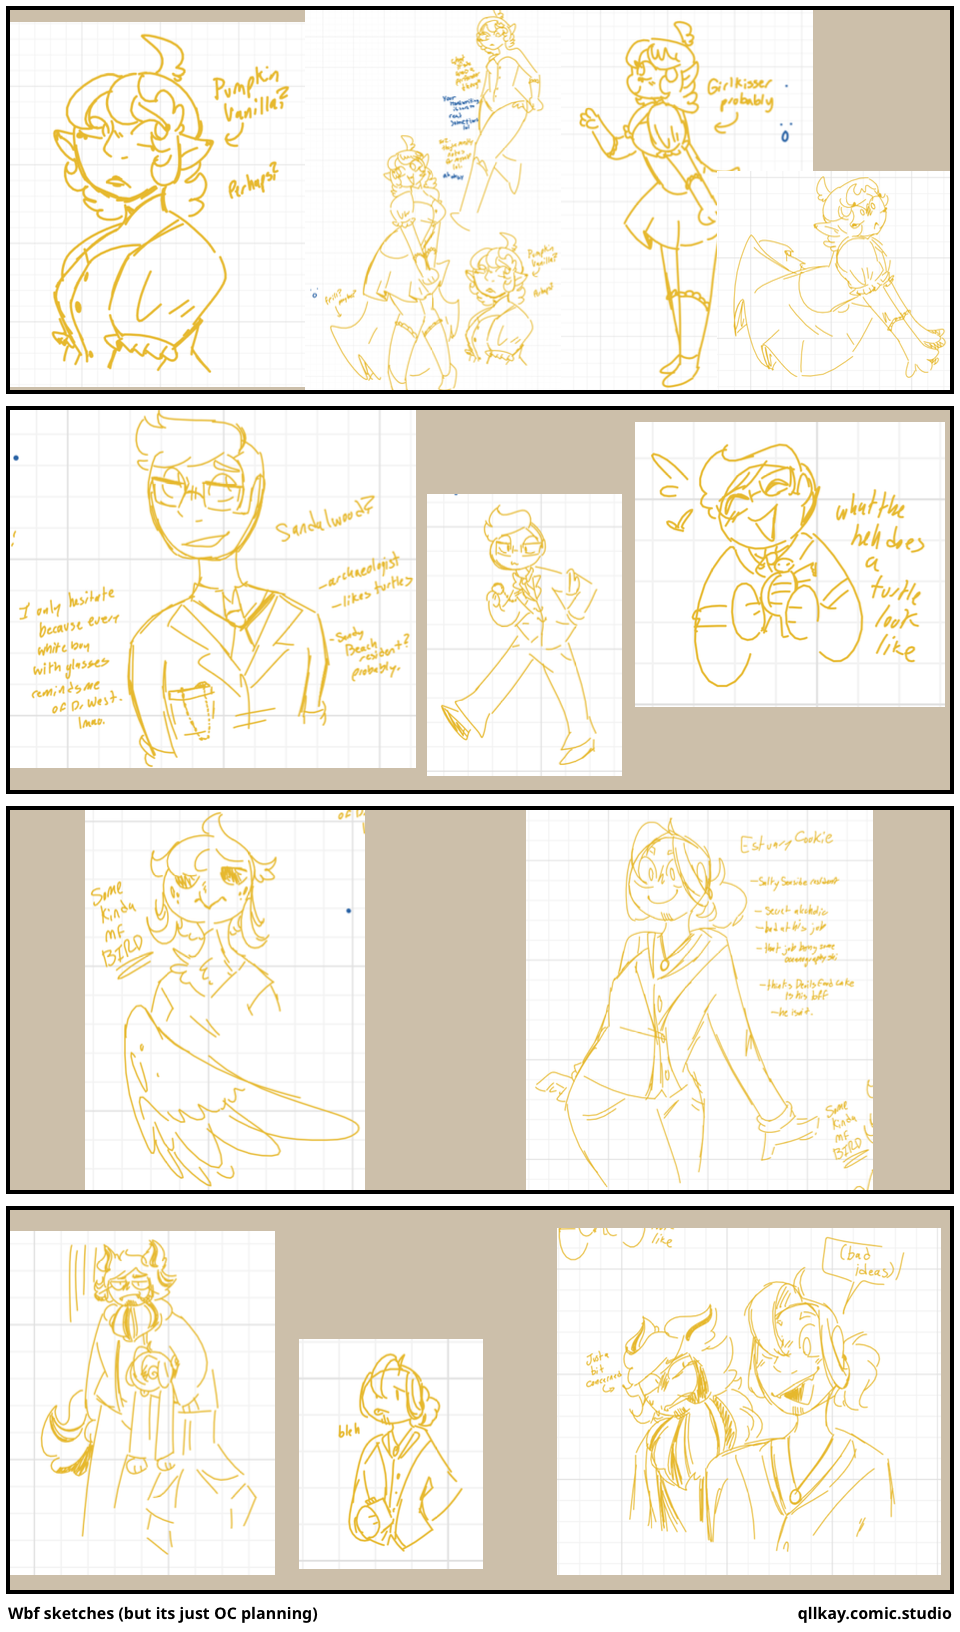 Wbf sketches (but its just OC planning)